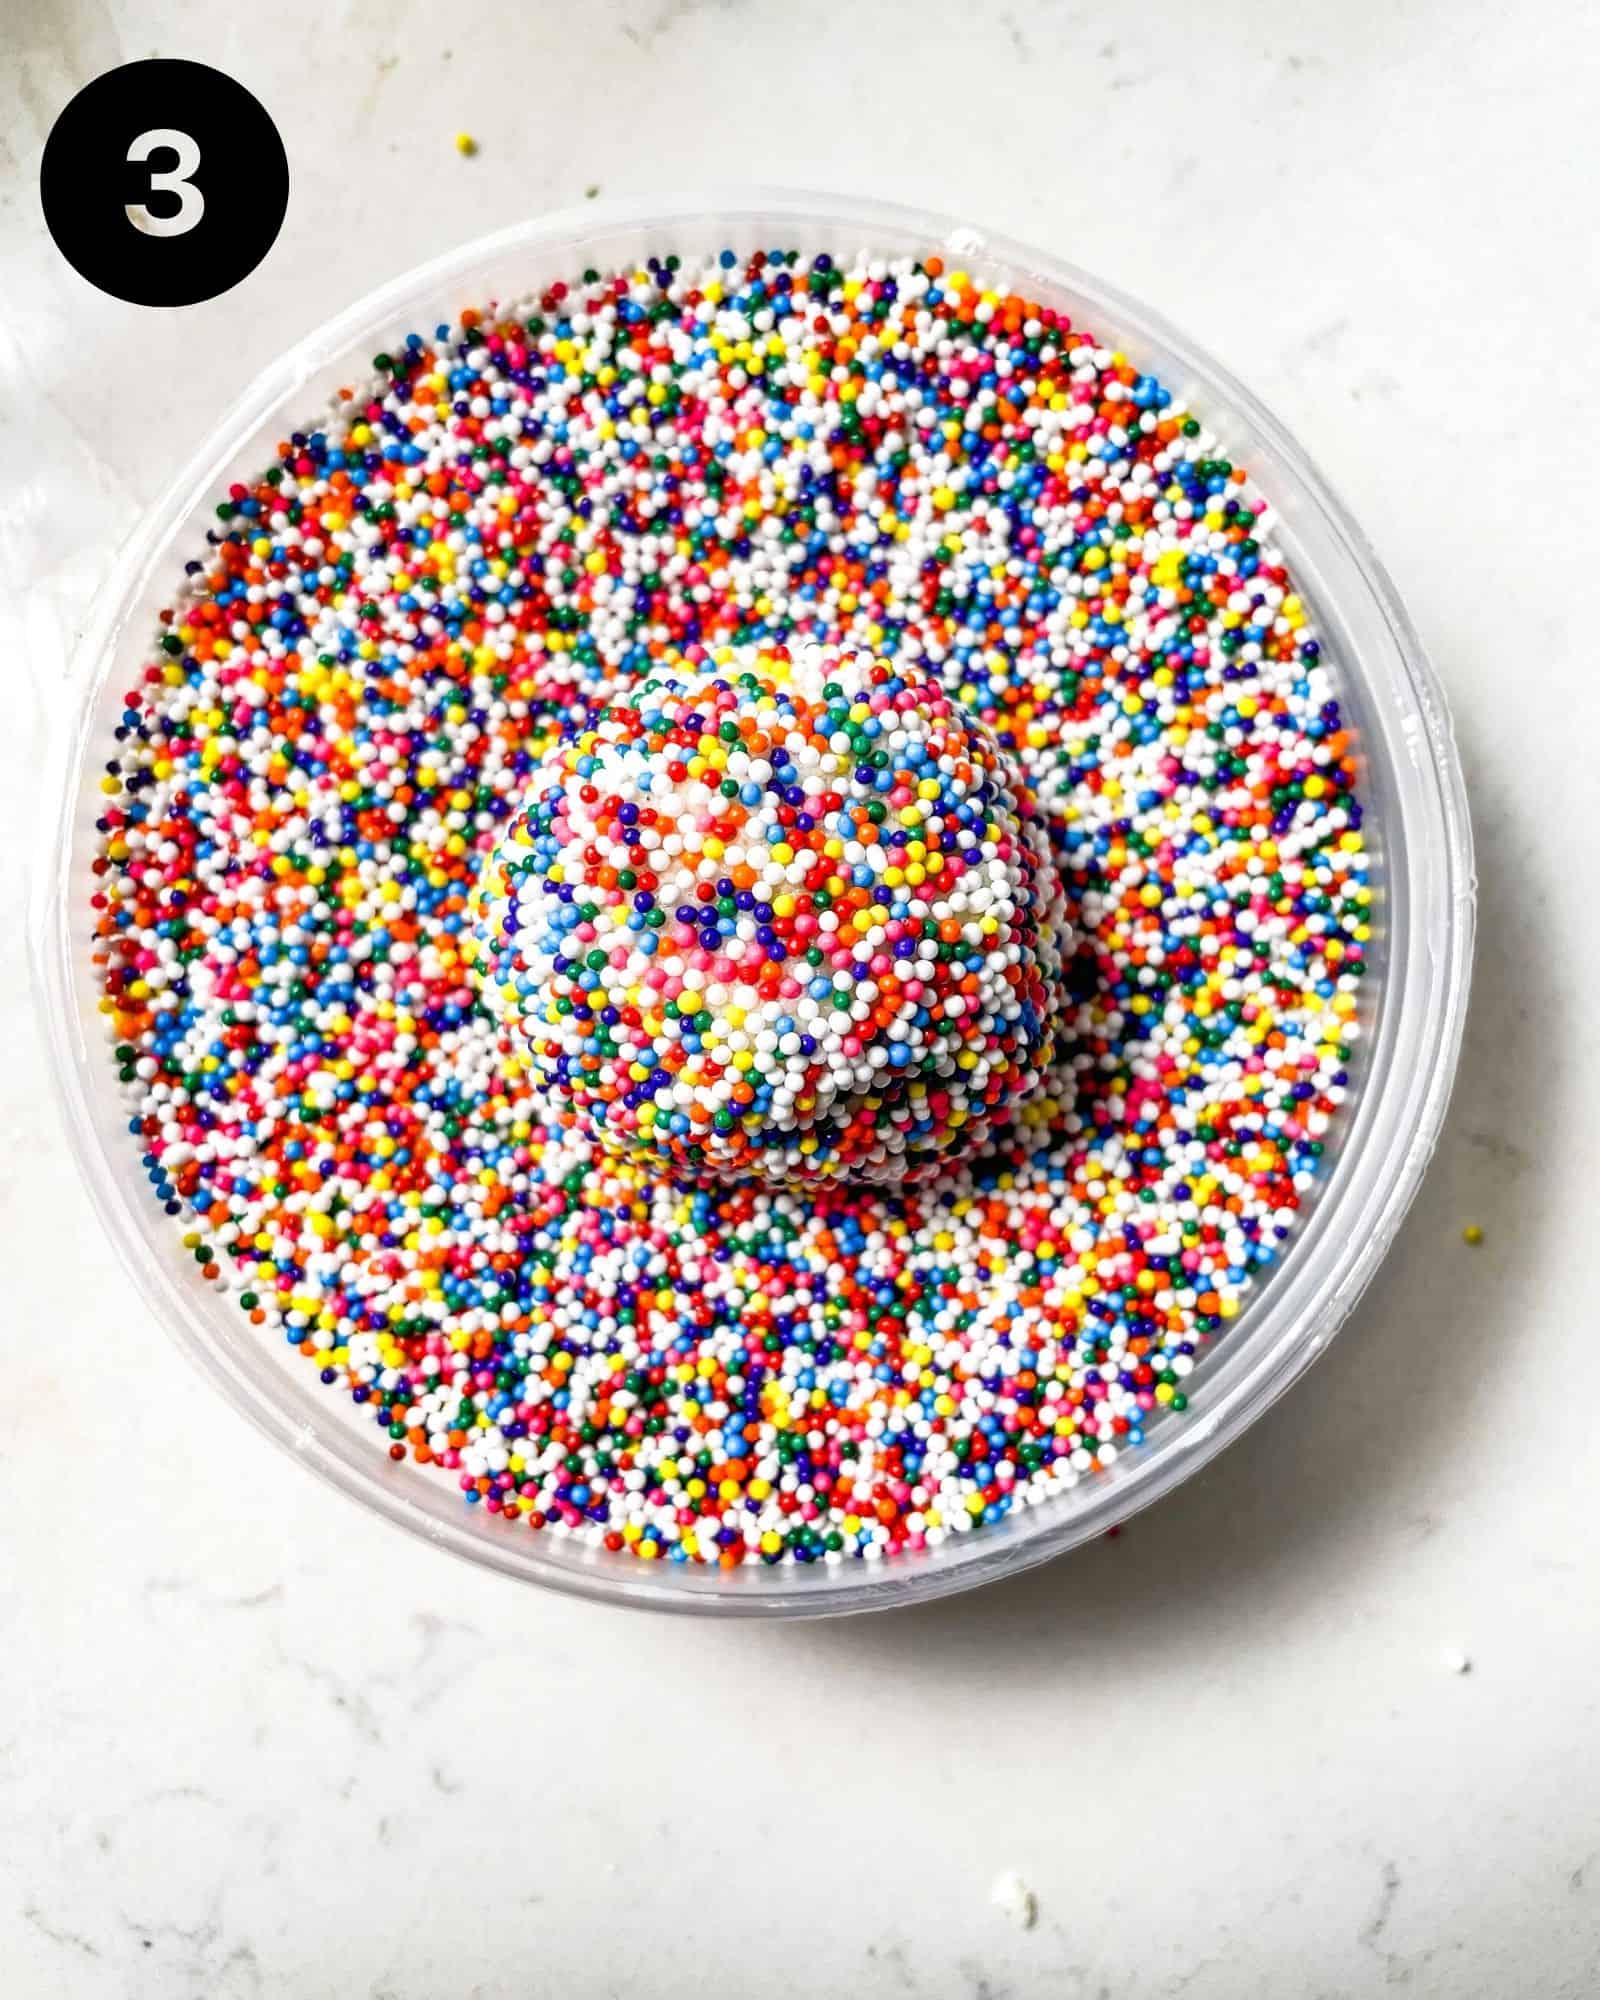 a cookie dough ball in a bowl of sprinkles.